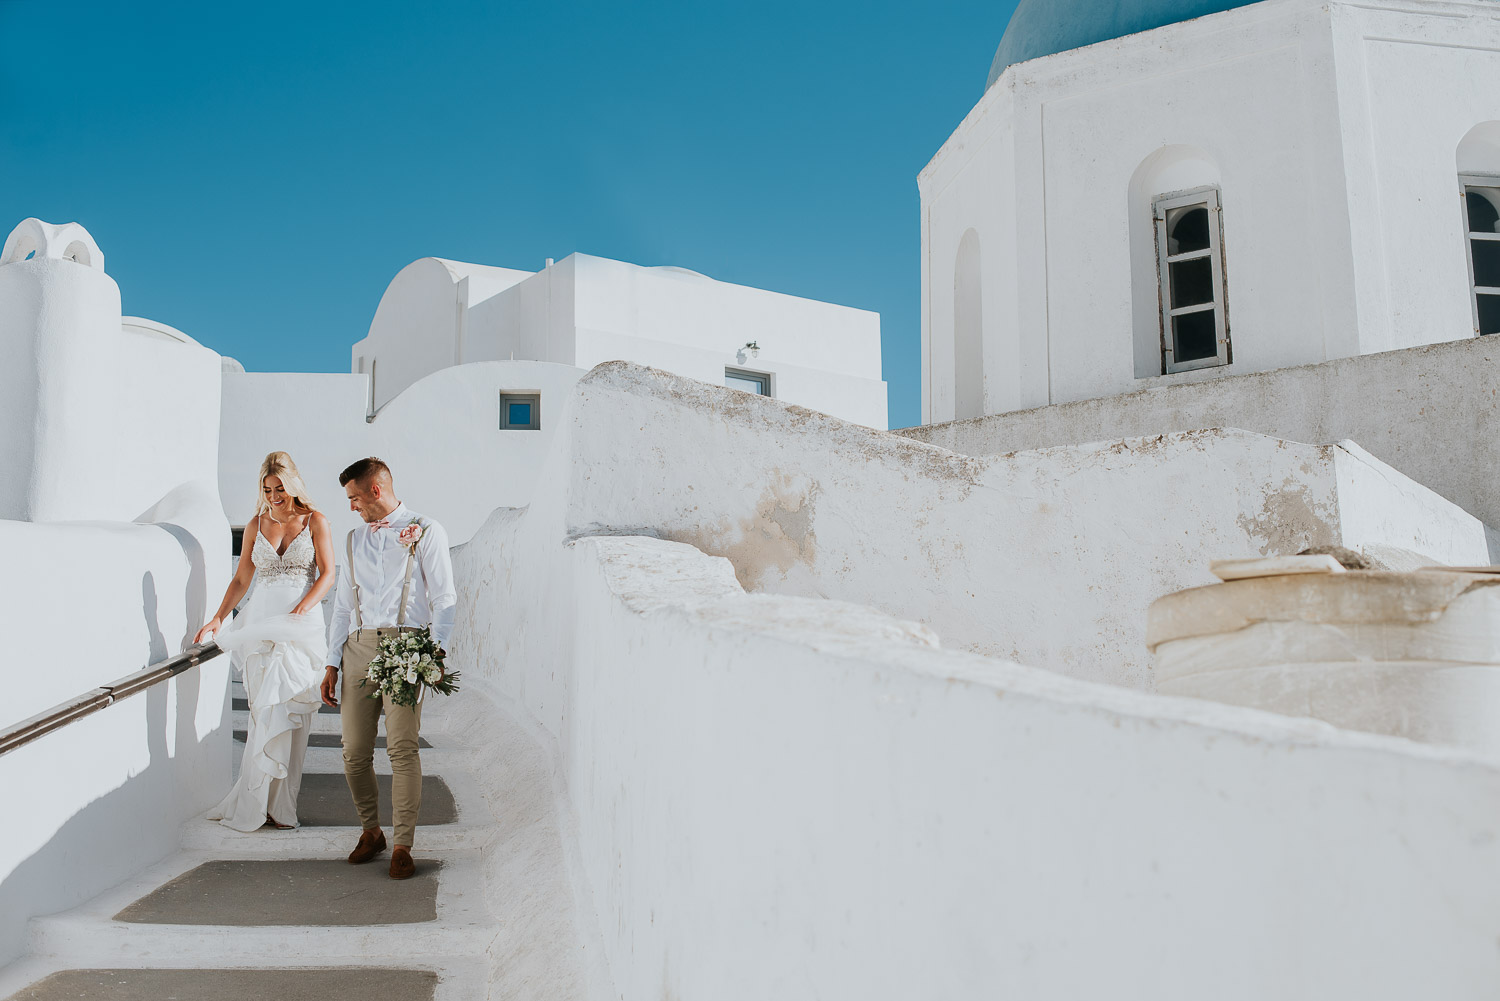 Wedding photographer Santorini: bride and groom walking down the stairs smiling passing blue dome church by Ben and Vesna.